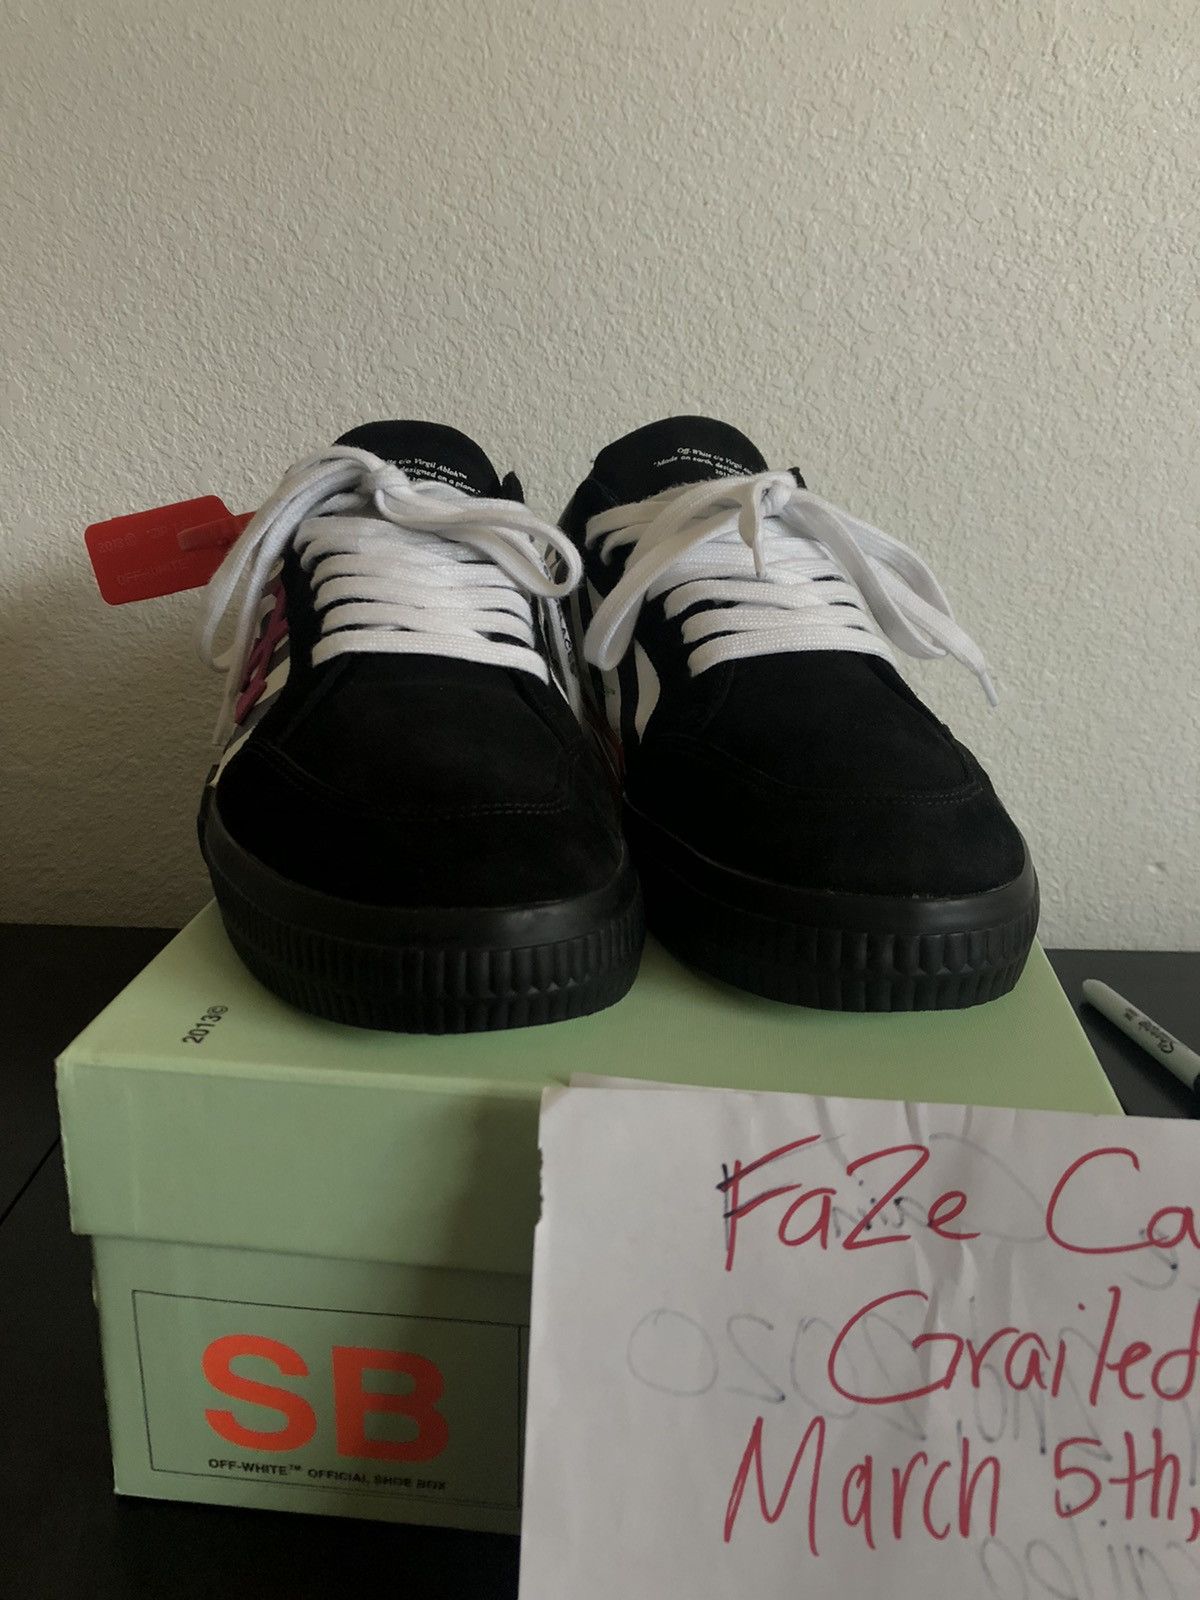 Off-White Off-White Sneakers Size US 11.5 / EU 44-45 - 2 Preview